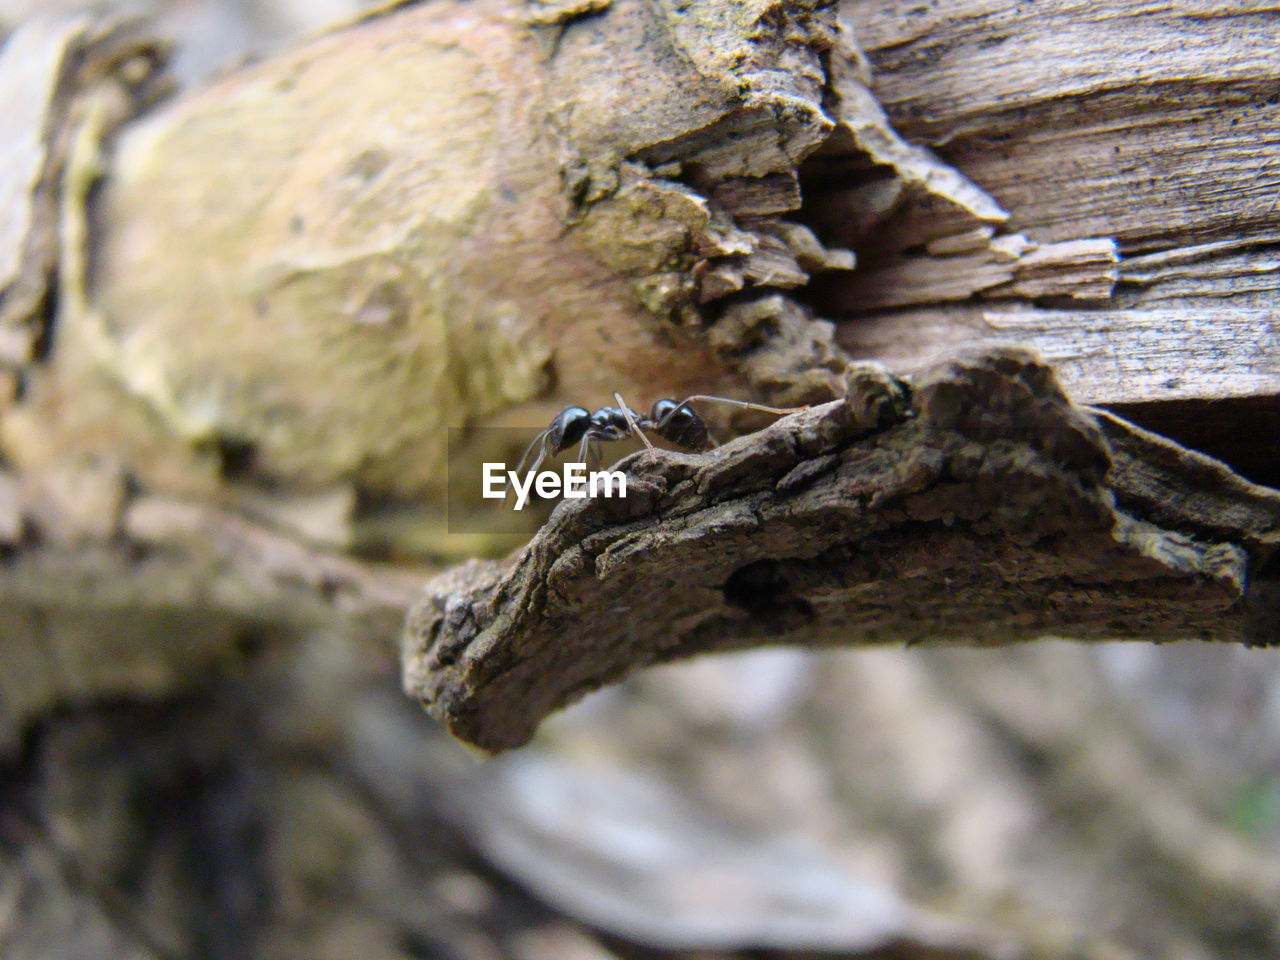 CLOSE-UP OF AN INSECT ON TREE TRUNK